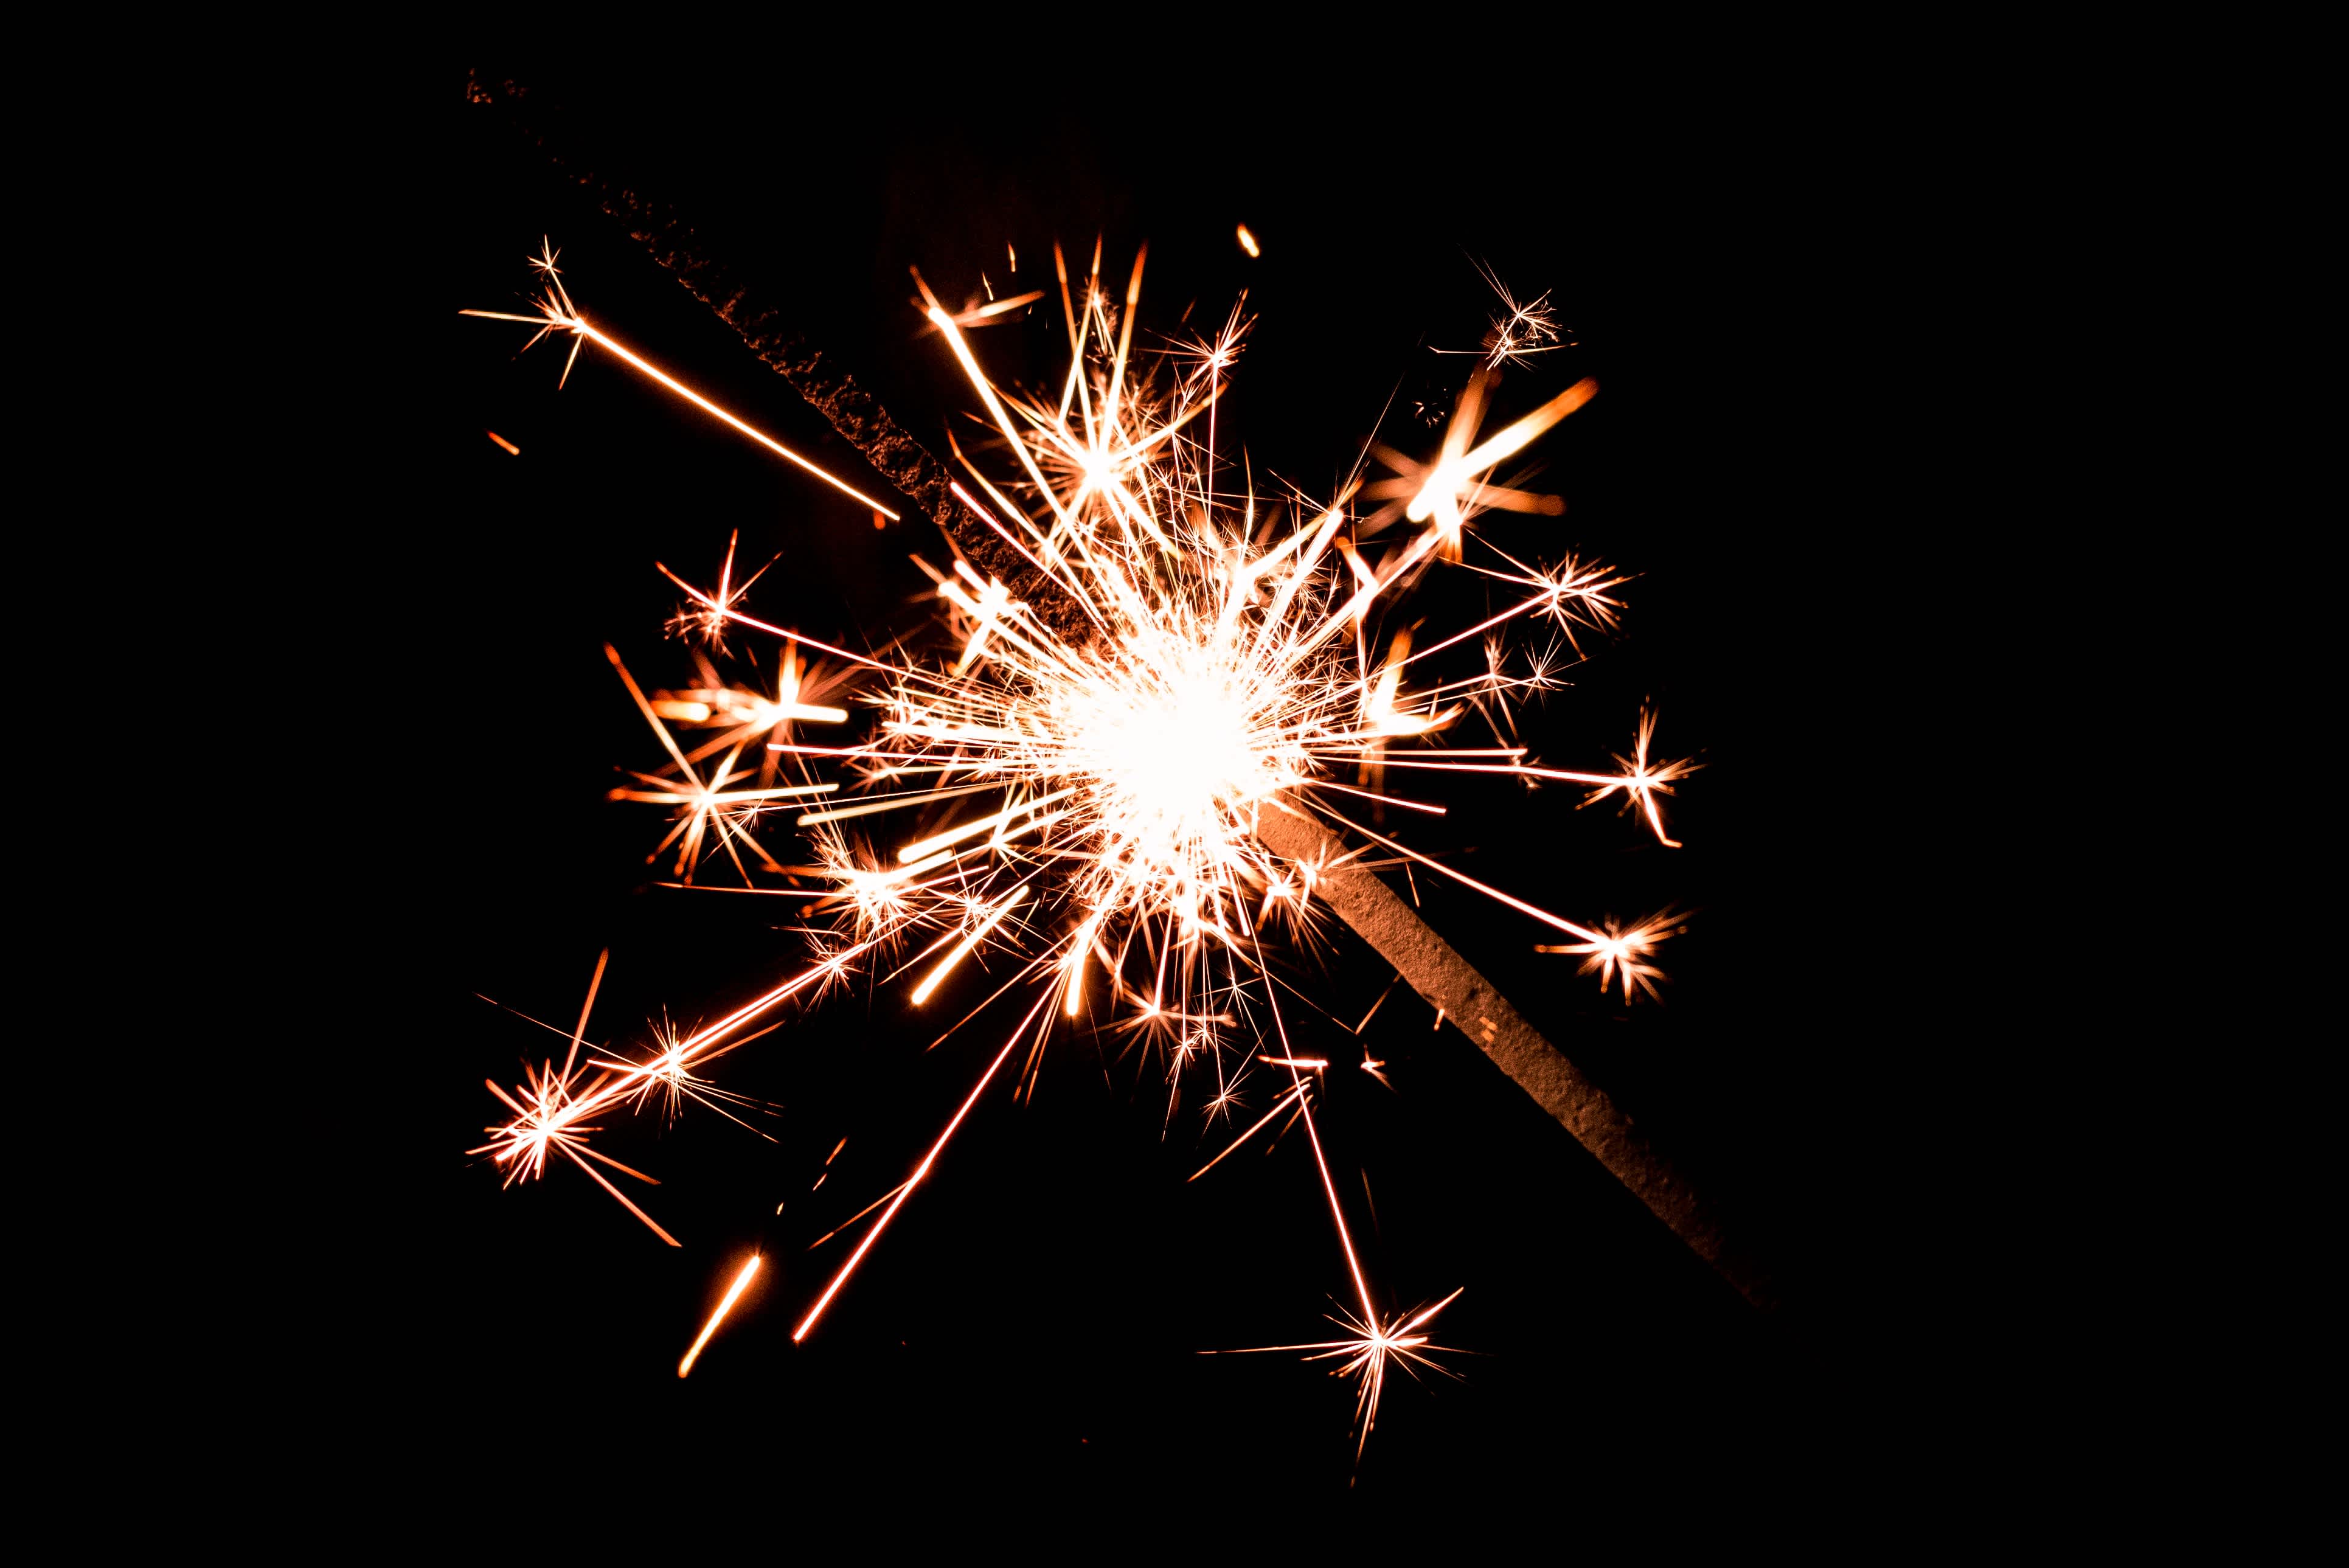 A photo of a gold sparkler against a black background.